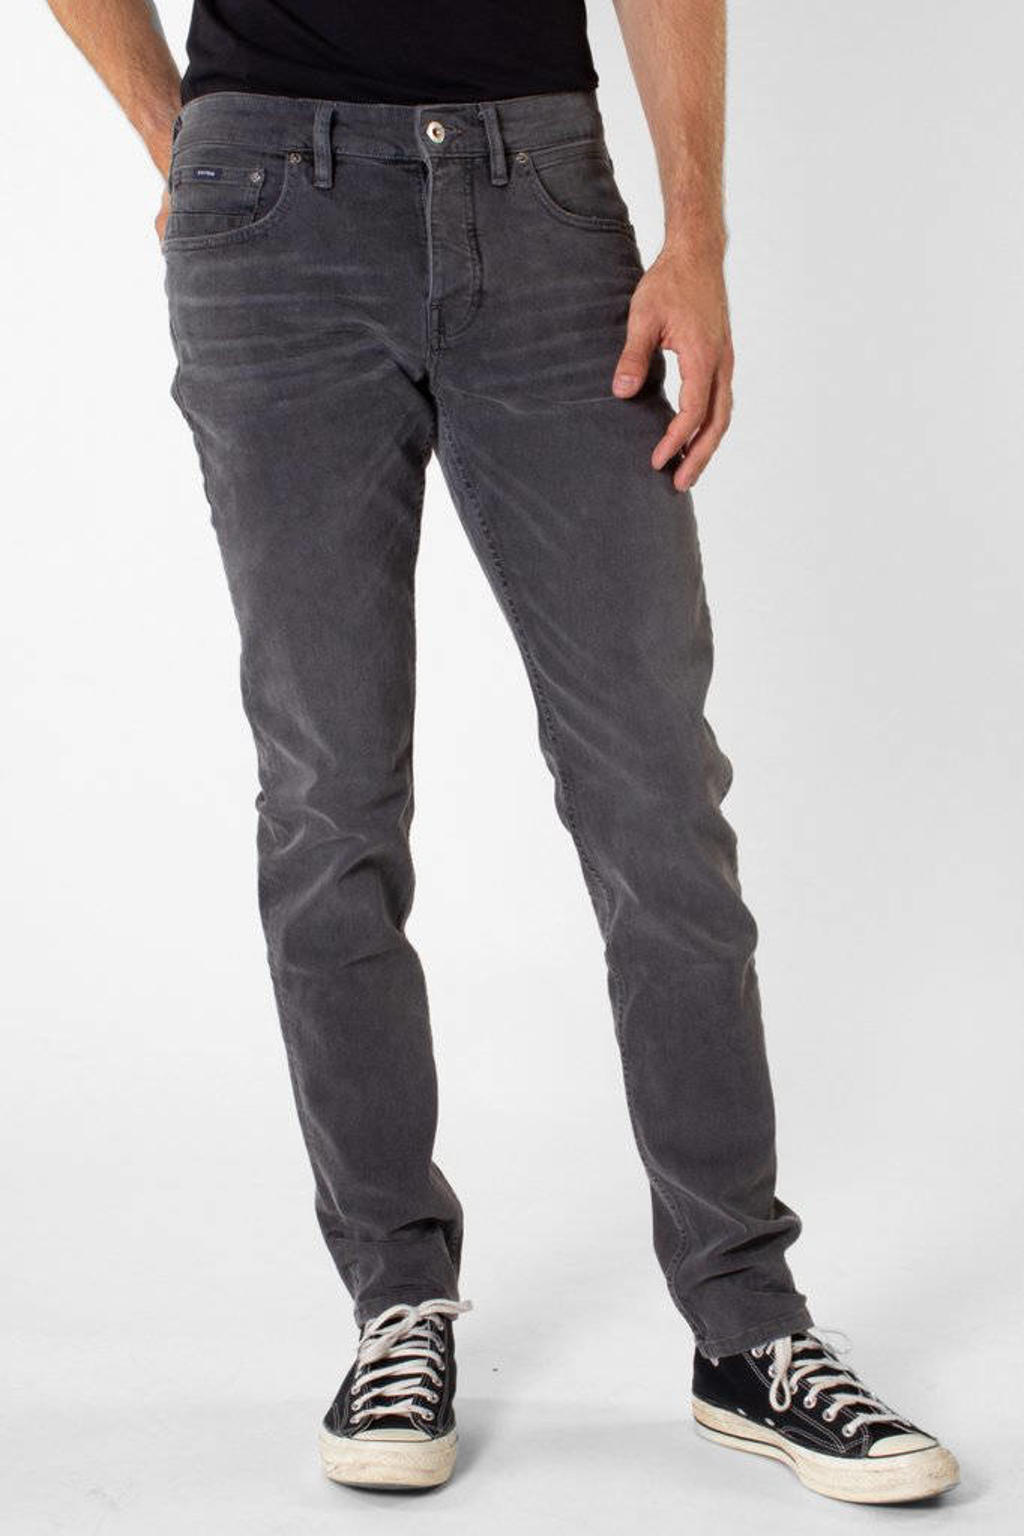 KUYICHI tapered fit jeans Jim rebel grey